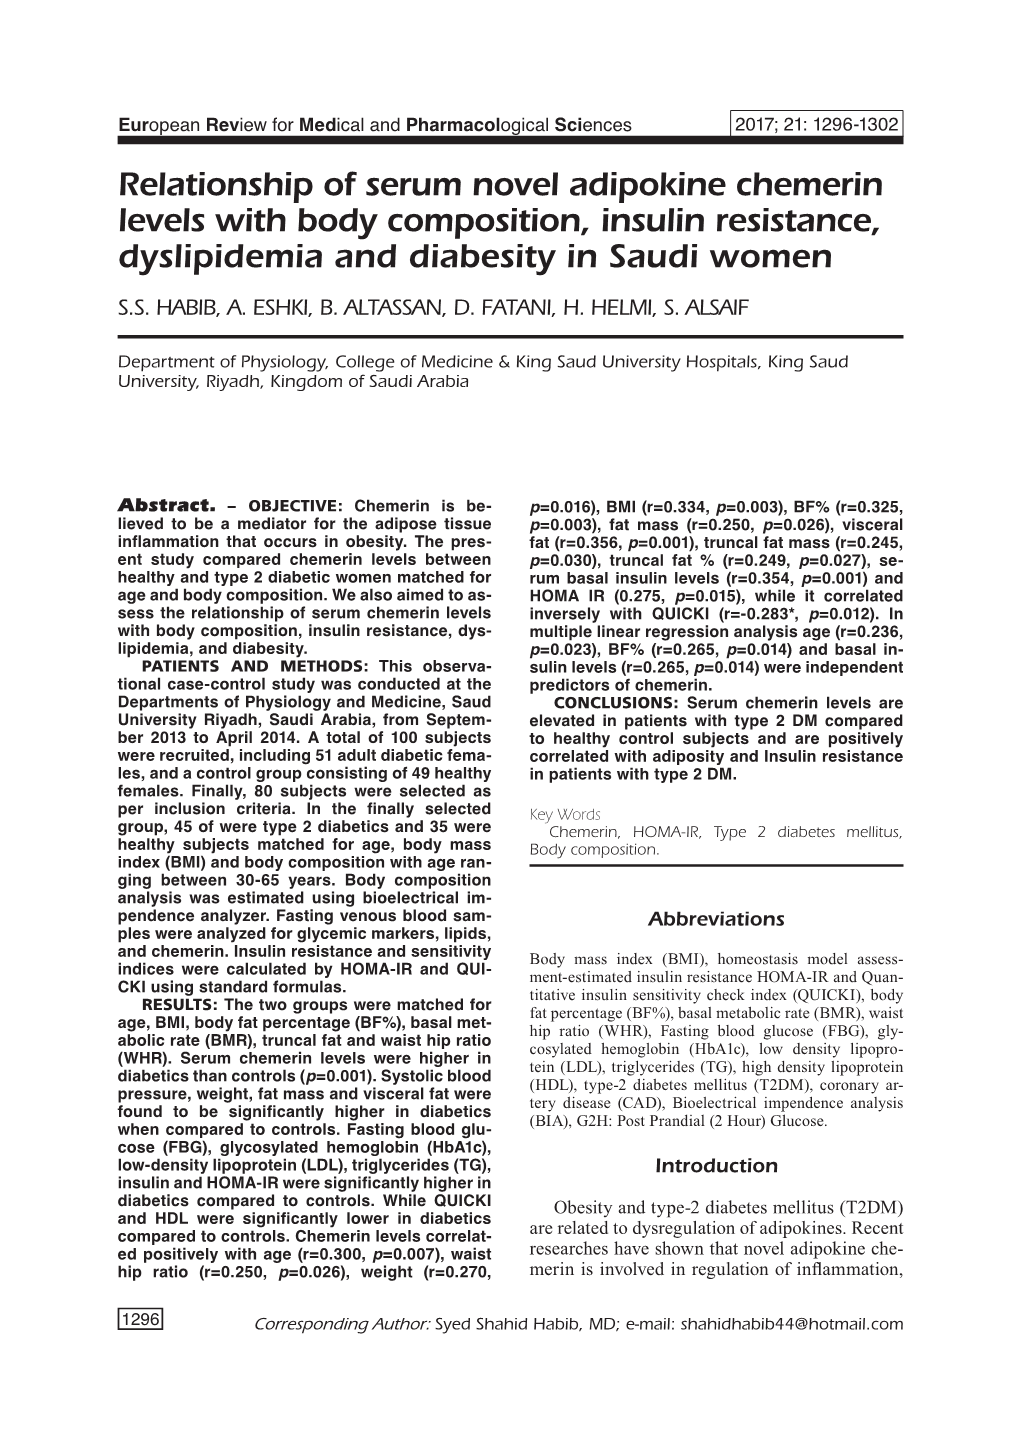 Relationship of Serum Novel Adipokine Chemerin Levels with Body Composition, Insulin Resistance, Dyslipidemia and Diabesity in Saudi Women S.S